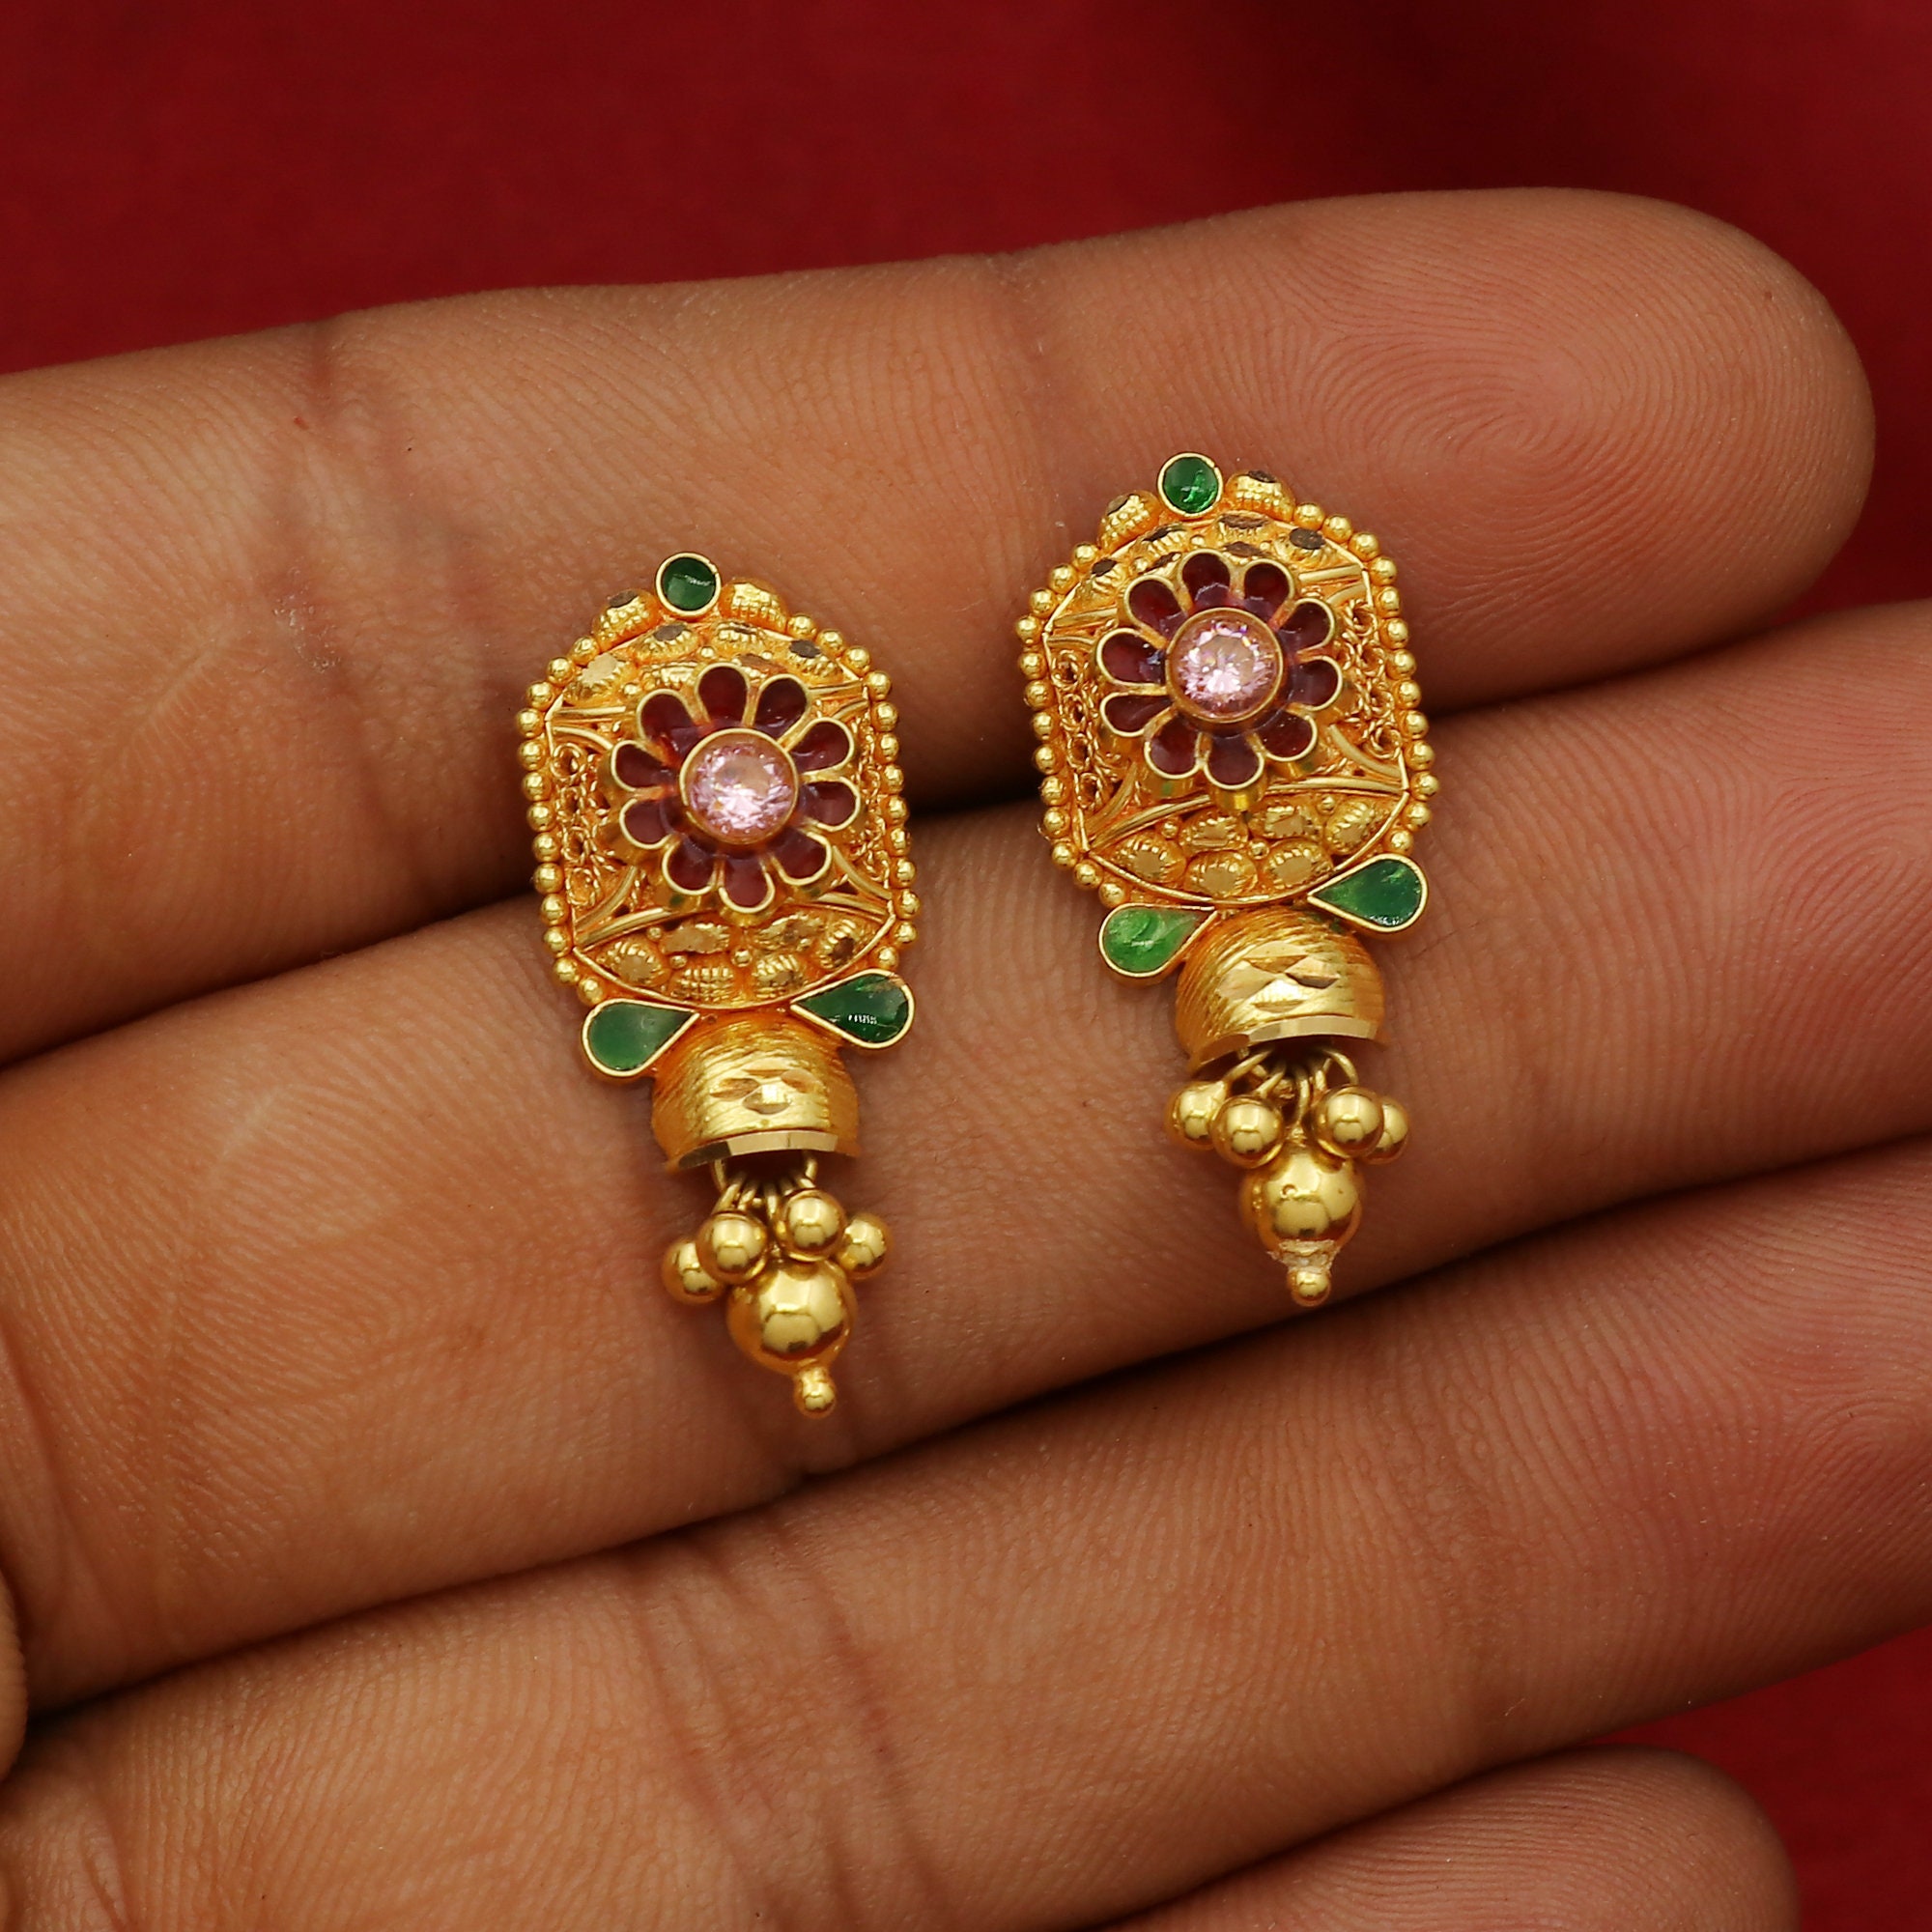 Indian Rajasthani Antique Gold Tone Traditional Stylish Gold Plated Jhumka  Earrings Stock Photo - Download Image Now - iStock